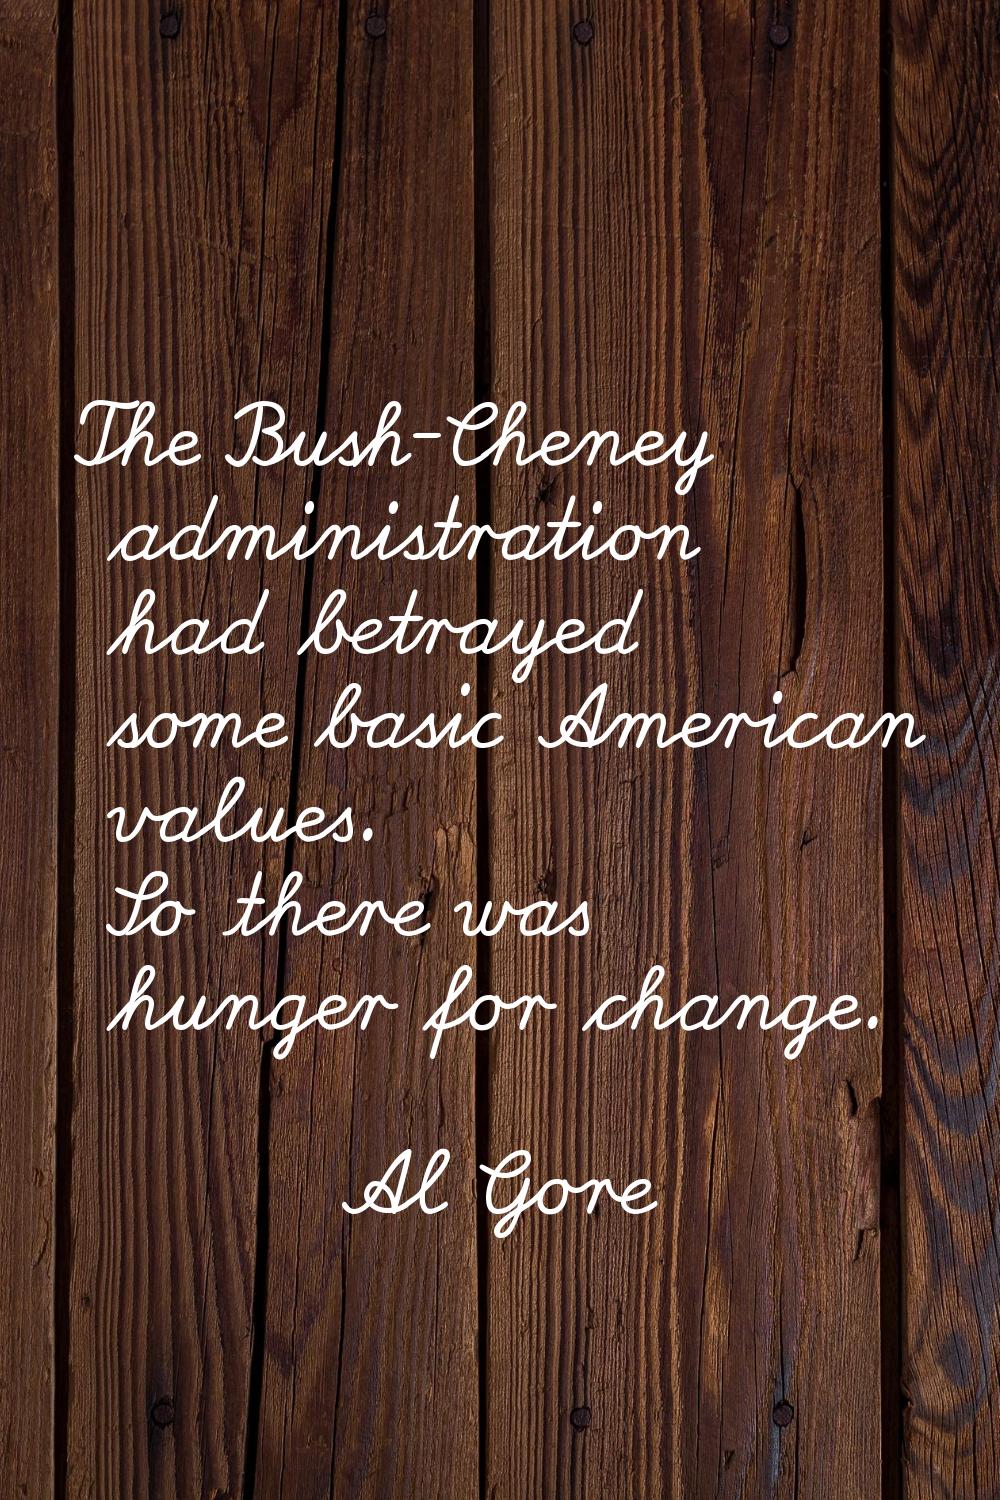 The Bush-Cheney administration had betrayed some basic American values. So there was hunger for cha